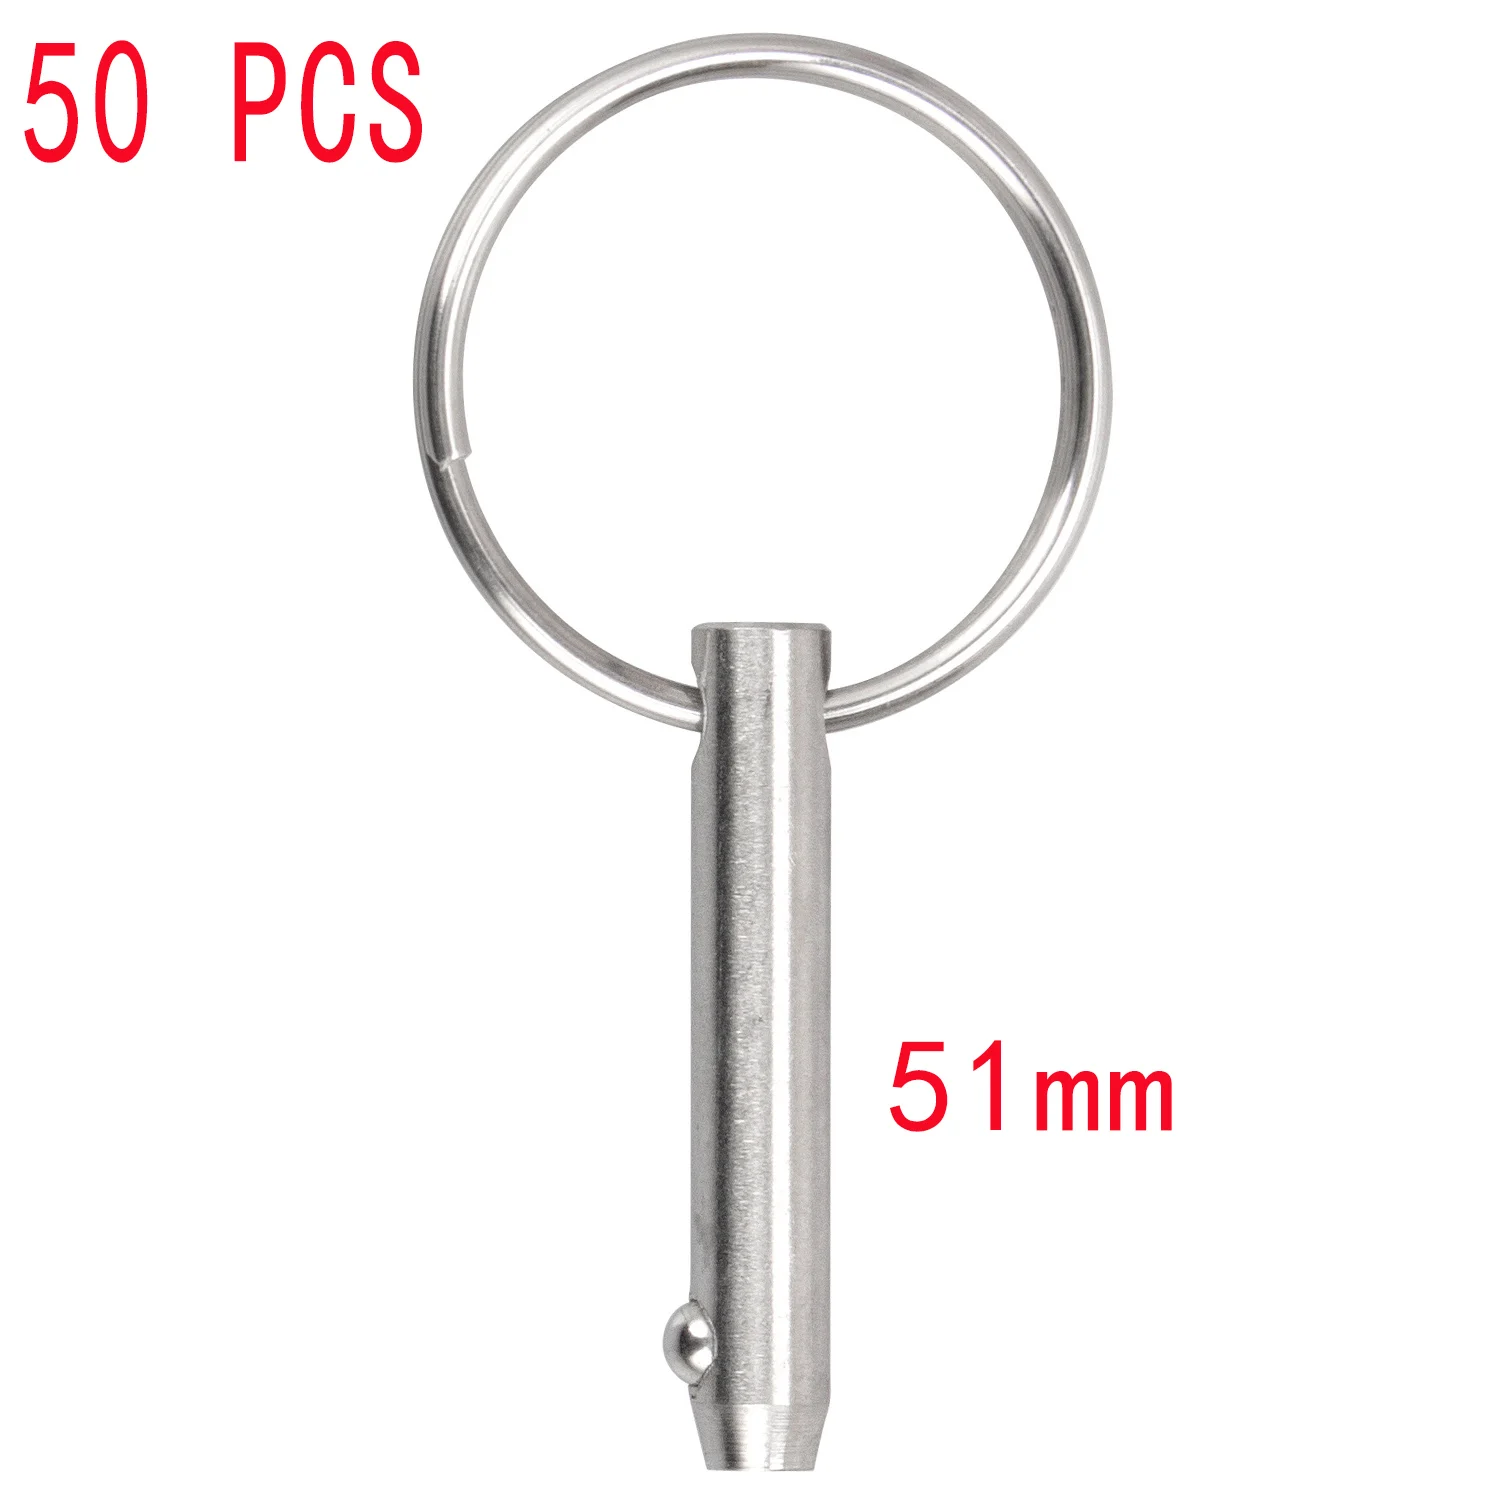 Quick Release Pins, Bimini Top Pins Diameter 0.25 Inch/6.3mm, Total Length 2 Inch/51mm, 316 Stainless Steel (50 Packs)